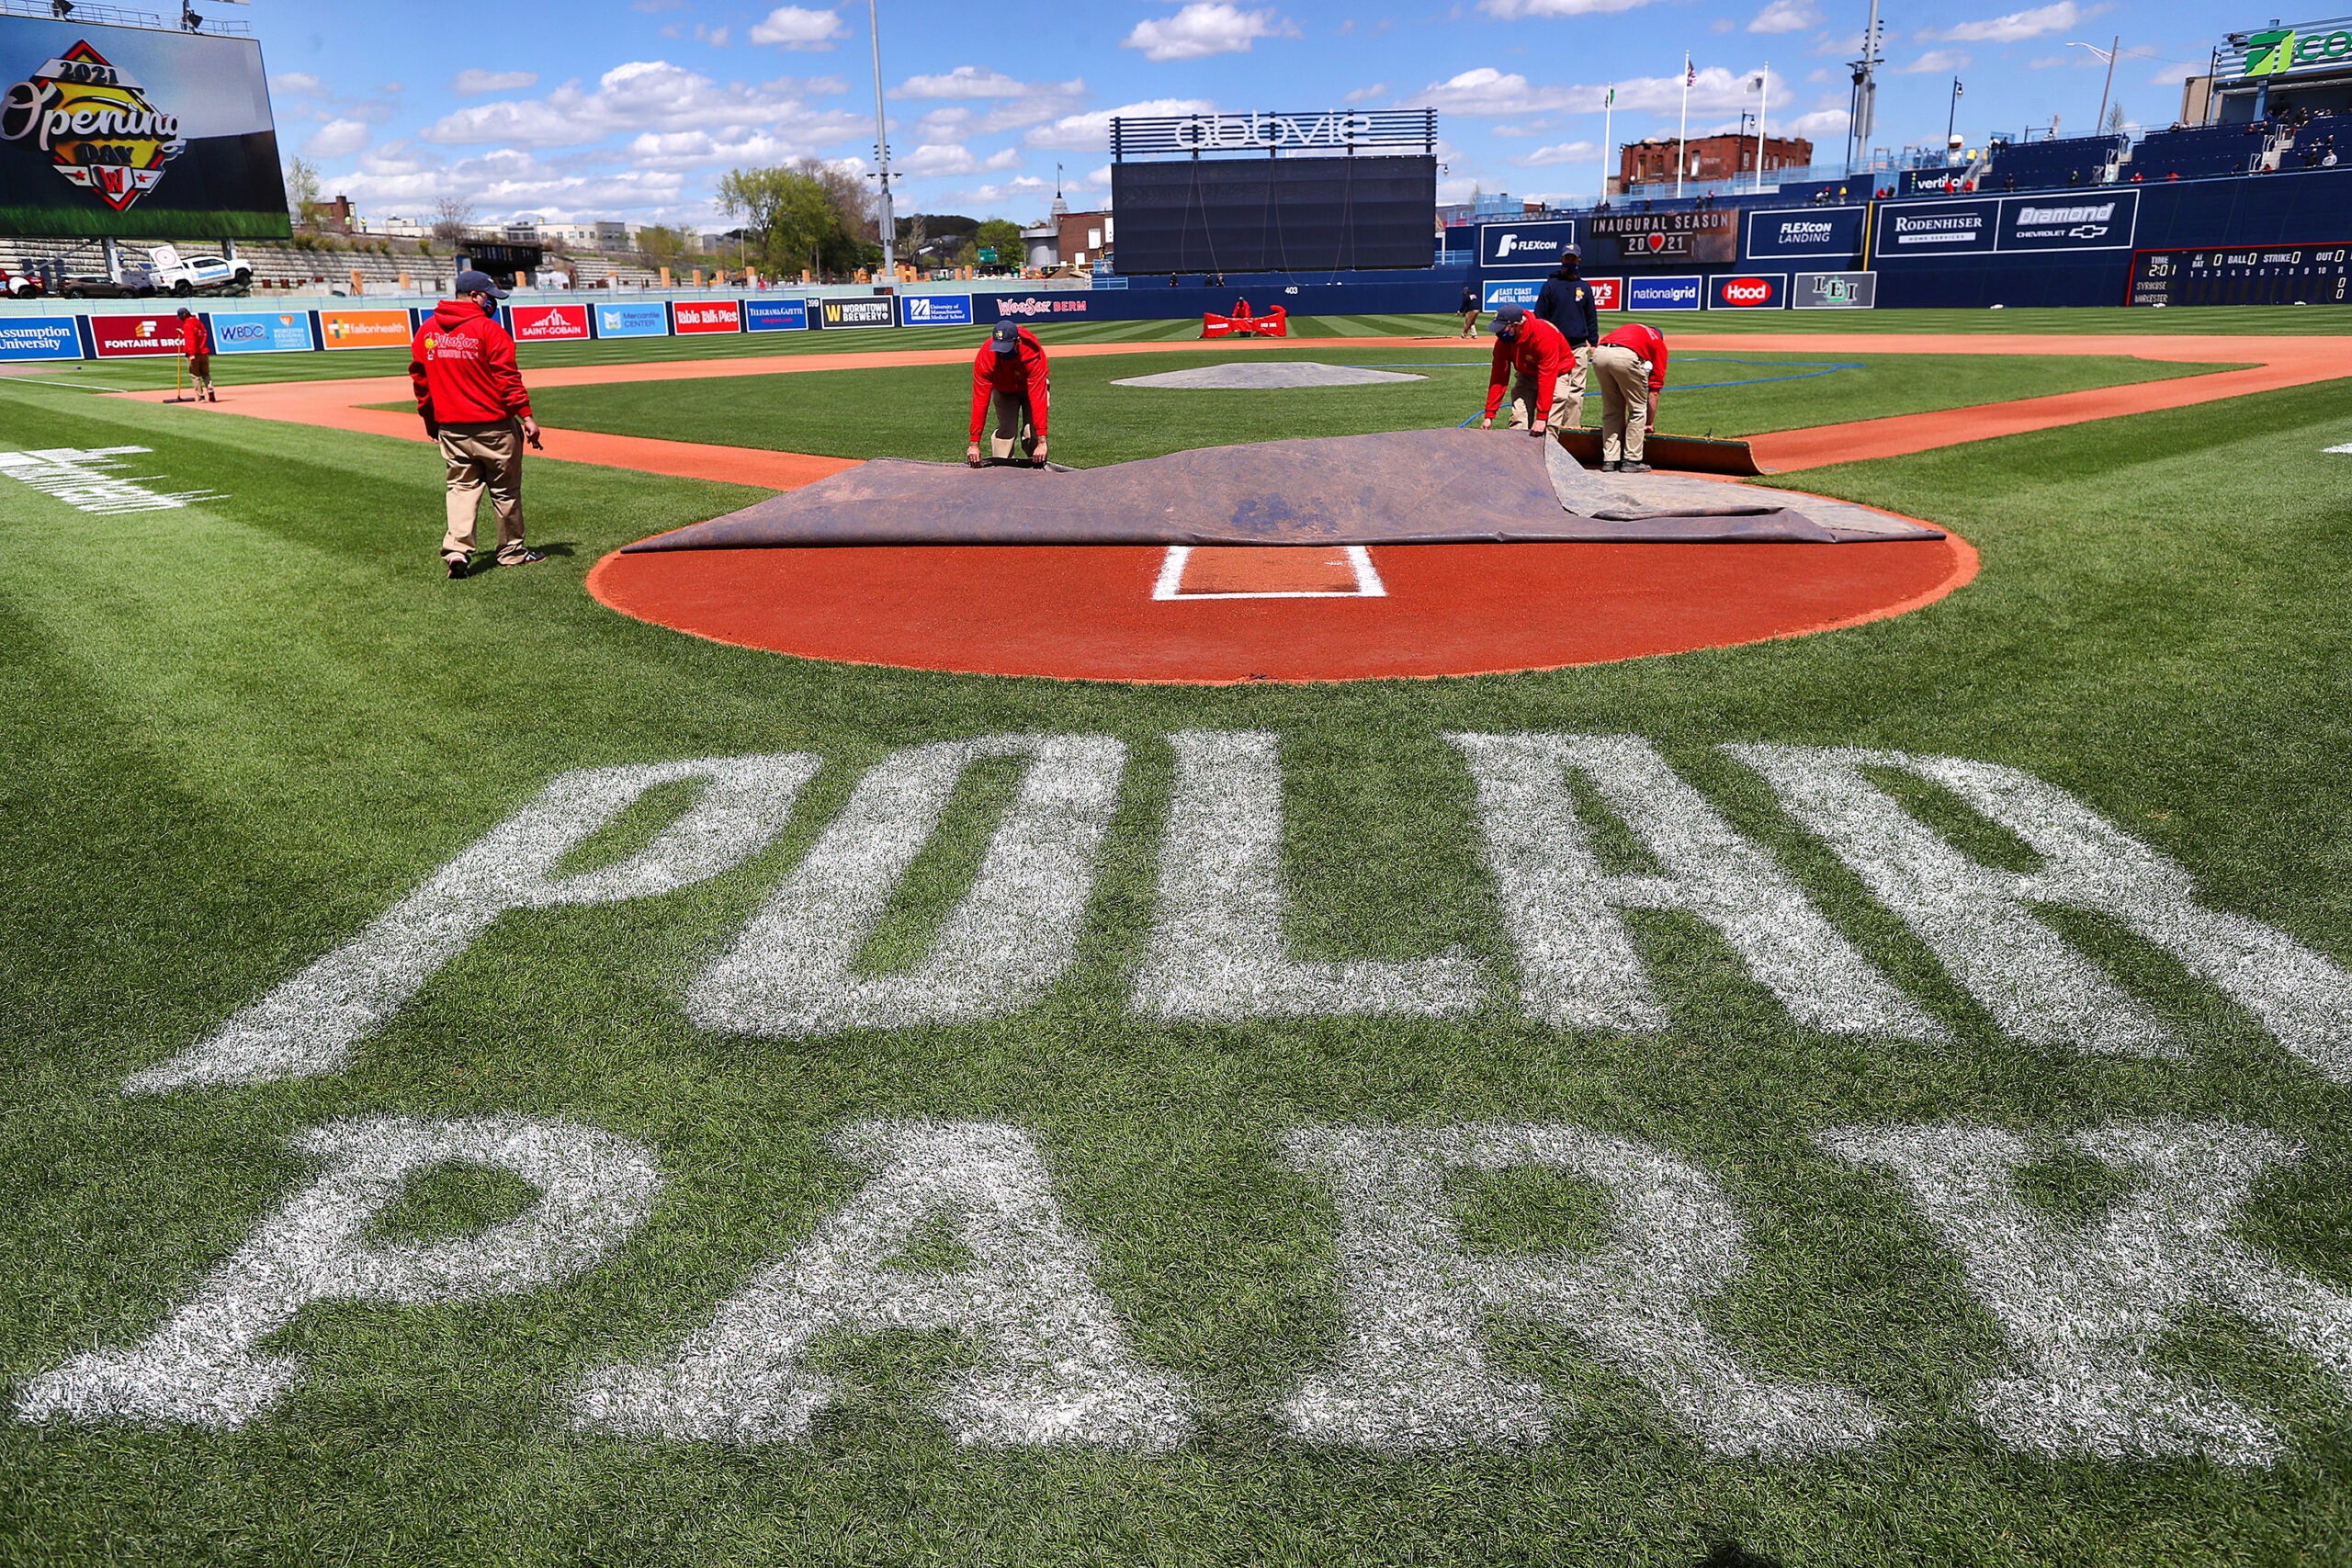 Polar Park Stadium and the Debut of the Worcester Red Sox - The